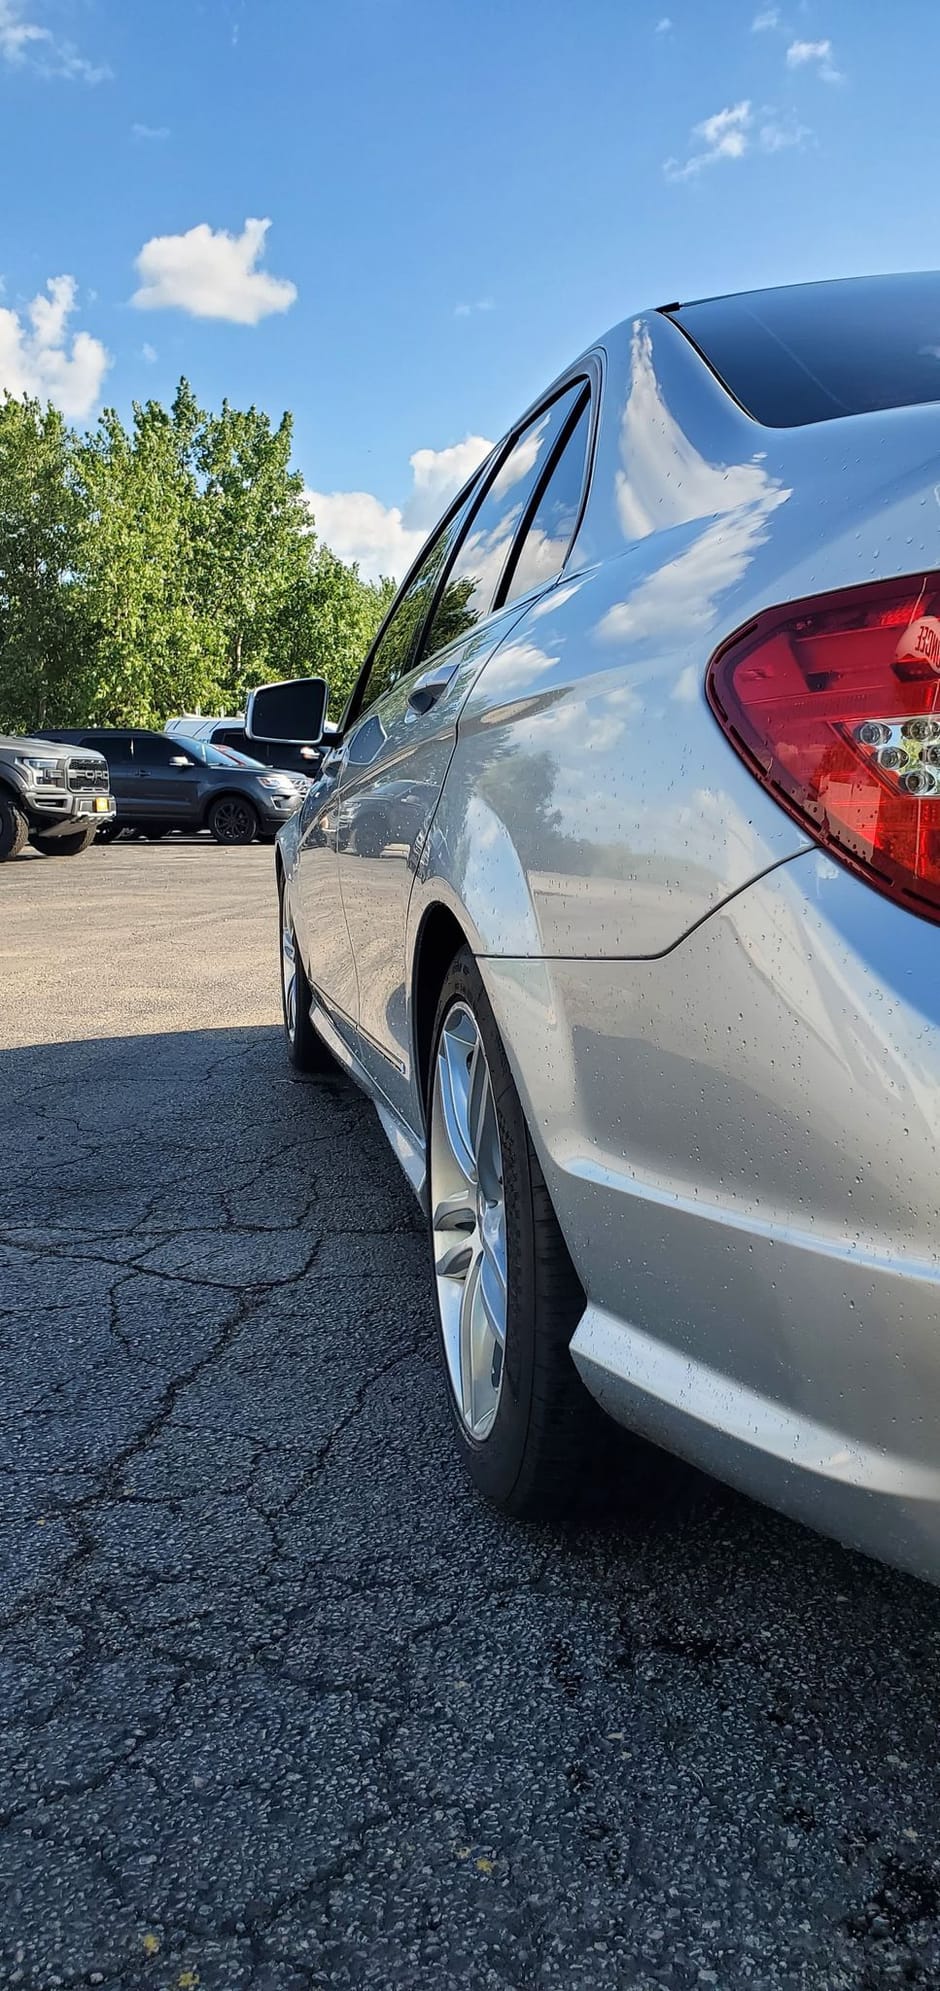 2012 Mercedes-Benz C300 - Like new 2012 Mercedes- Benz C300 4-Matic - Used - VIN WDDGF8BB7CR212037 - 88,410 Miles - 6 cyl - AWD - Automatic - Sedan - Silver - East Dundee, IL 60118, United States